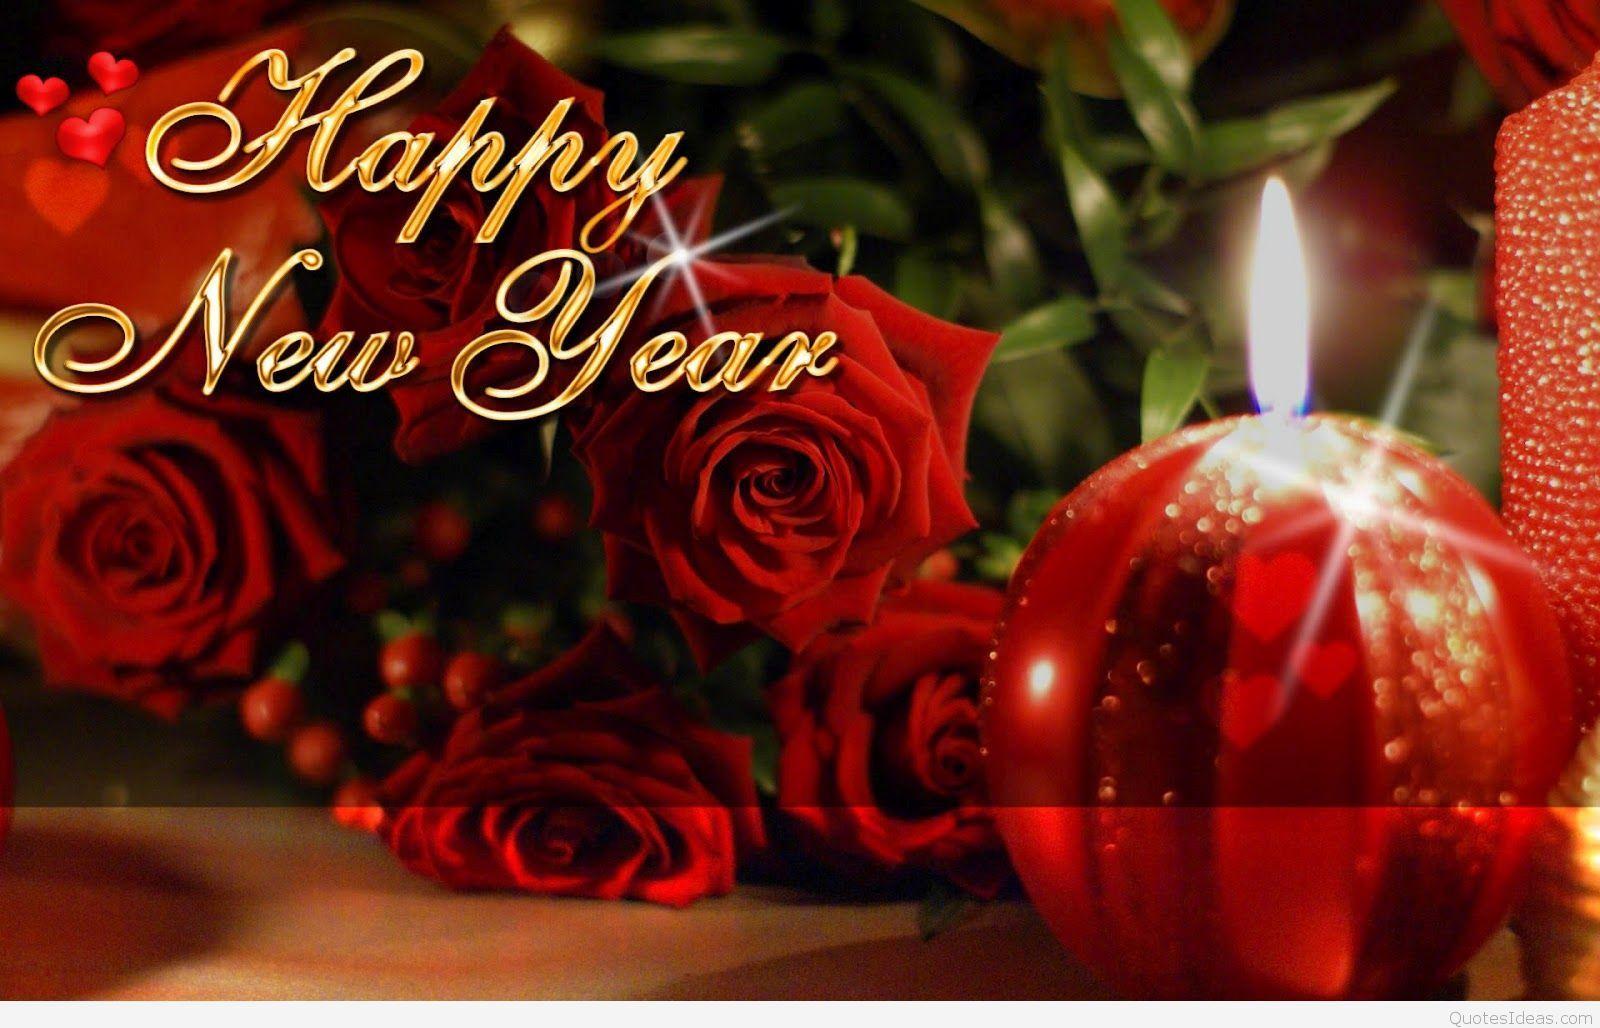 Wallpaper Of New Year 2016